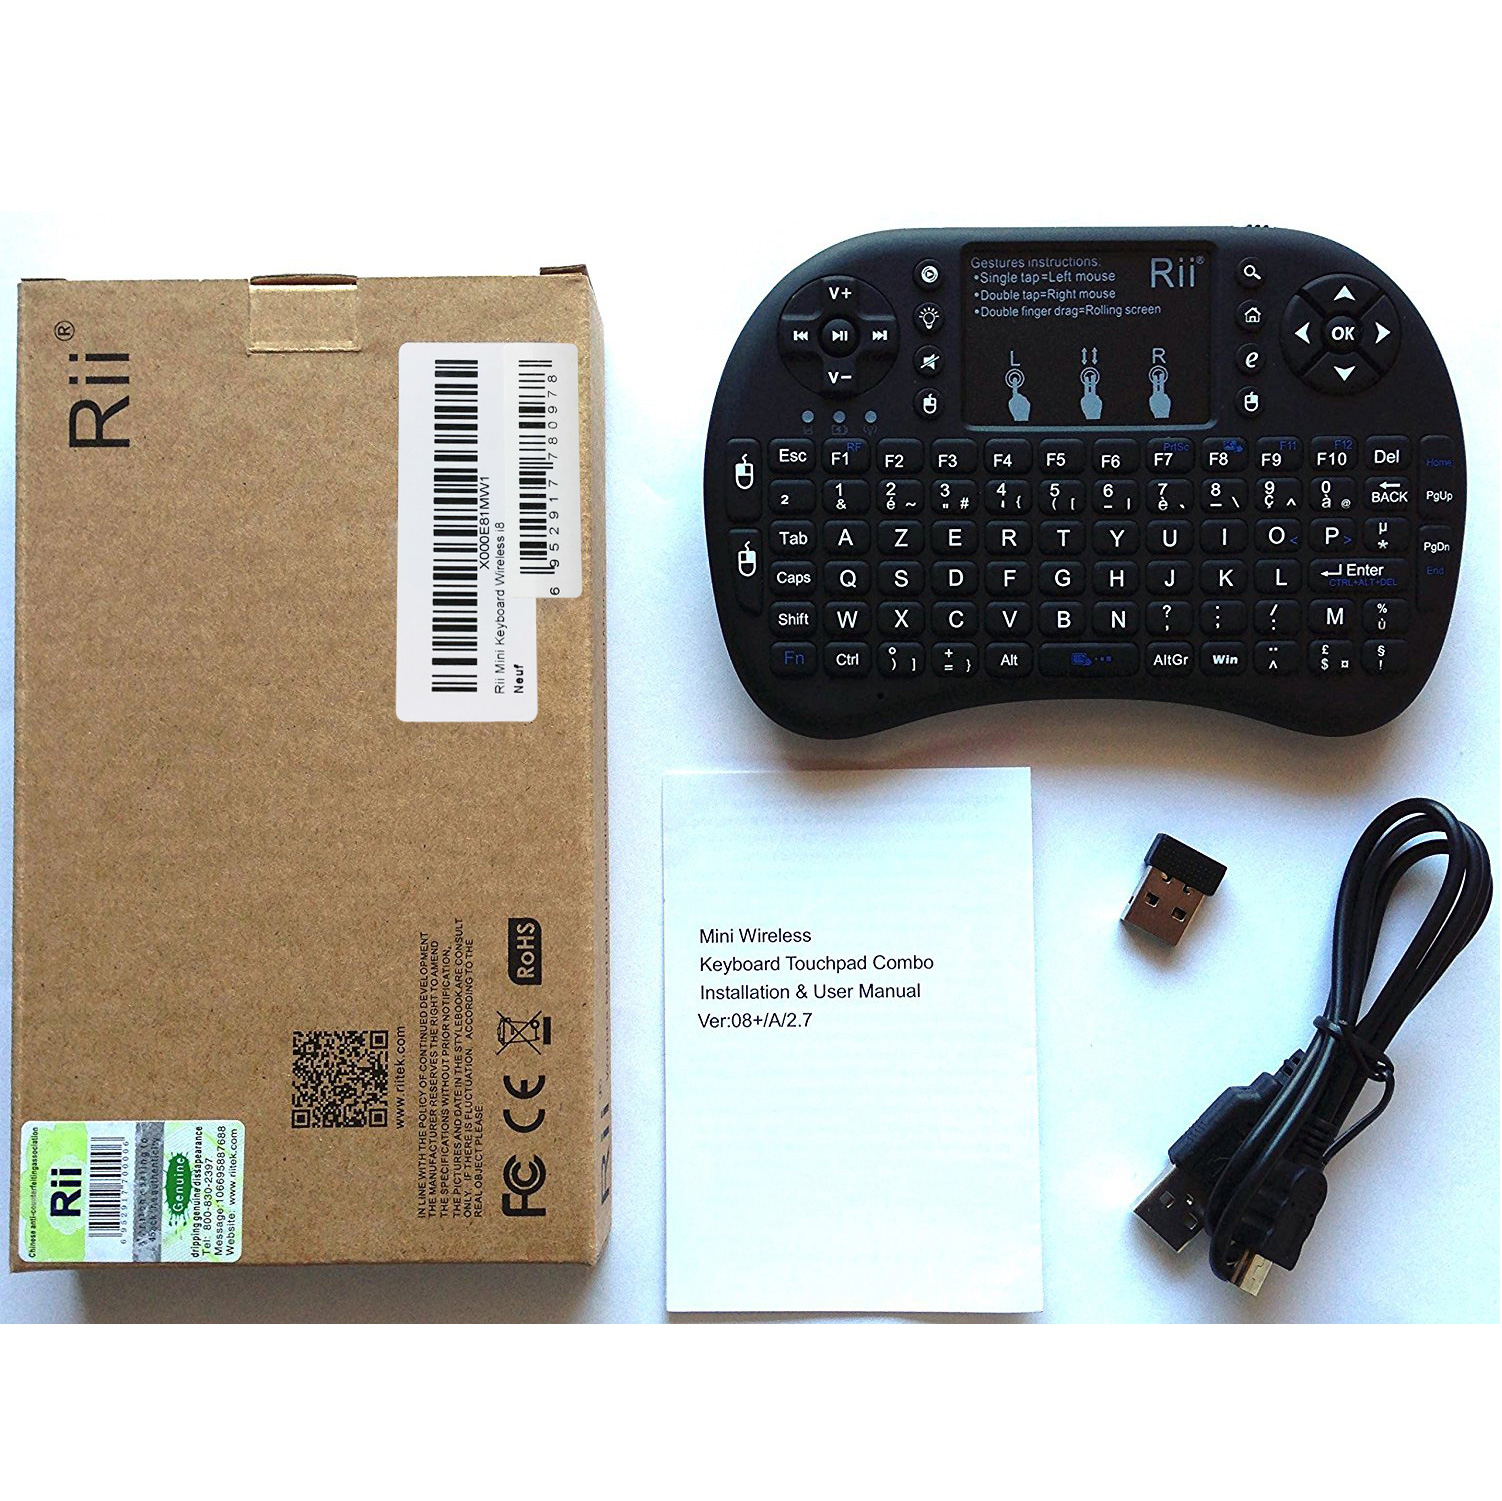 Rii i8 plus Mini Wireless keyboard (2.4G) for Windows, Mac, Linux and Android. Inc. MULTI-touch touchpad. USB Dongle, Li-Ion Battery